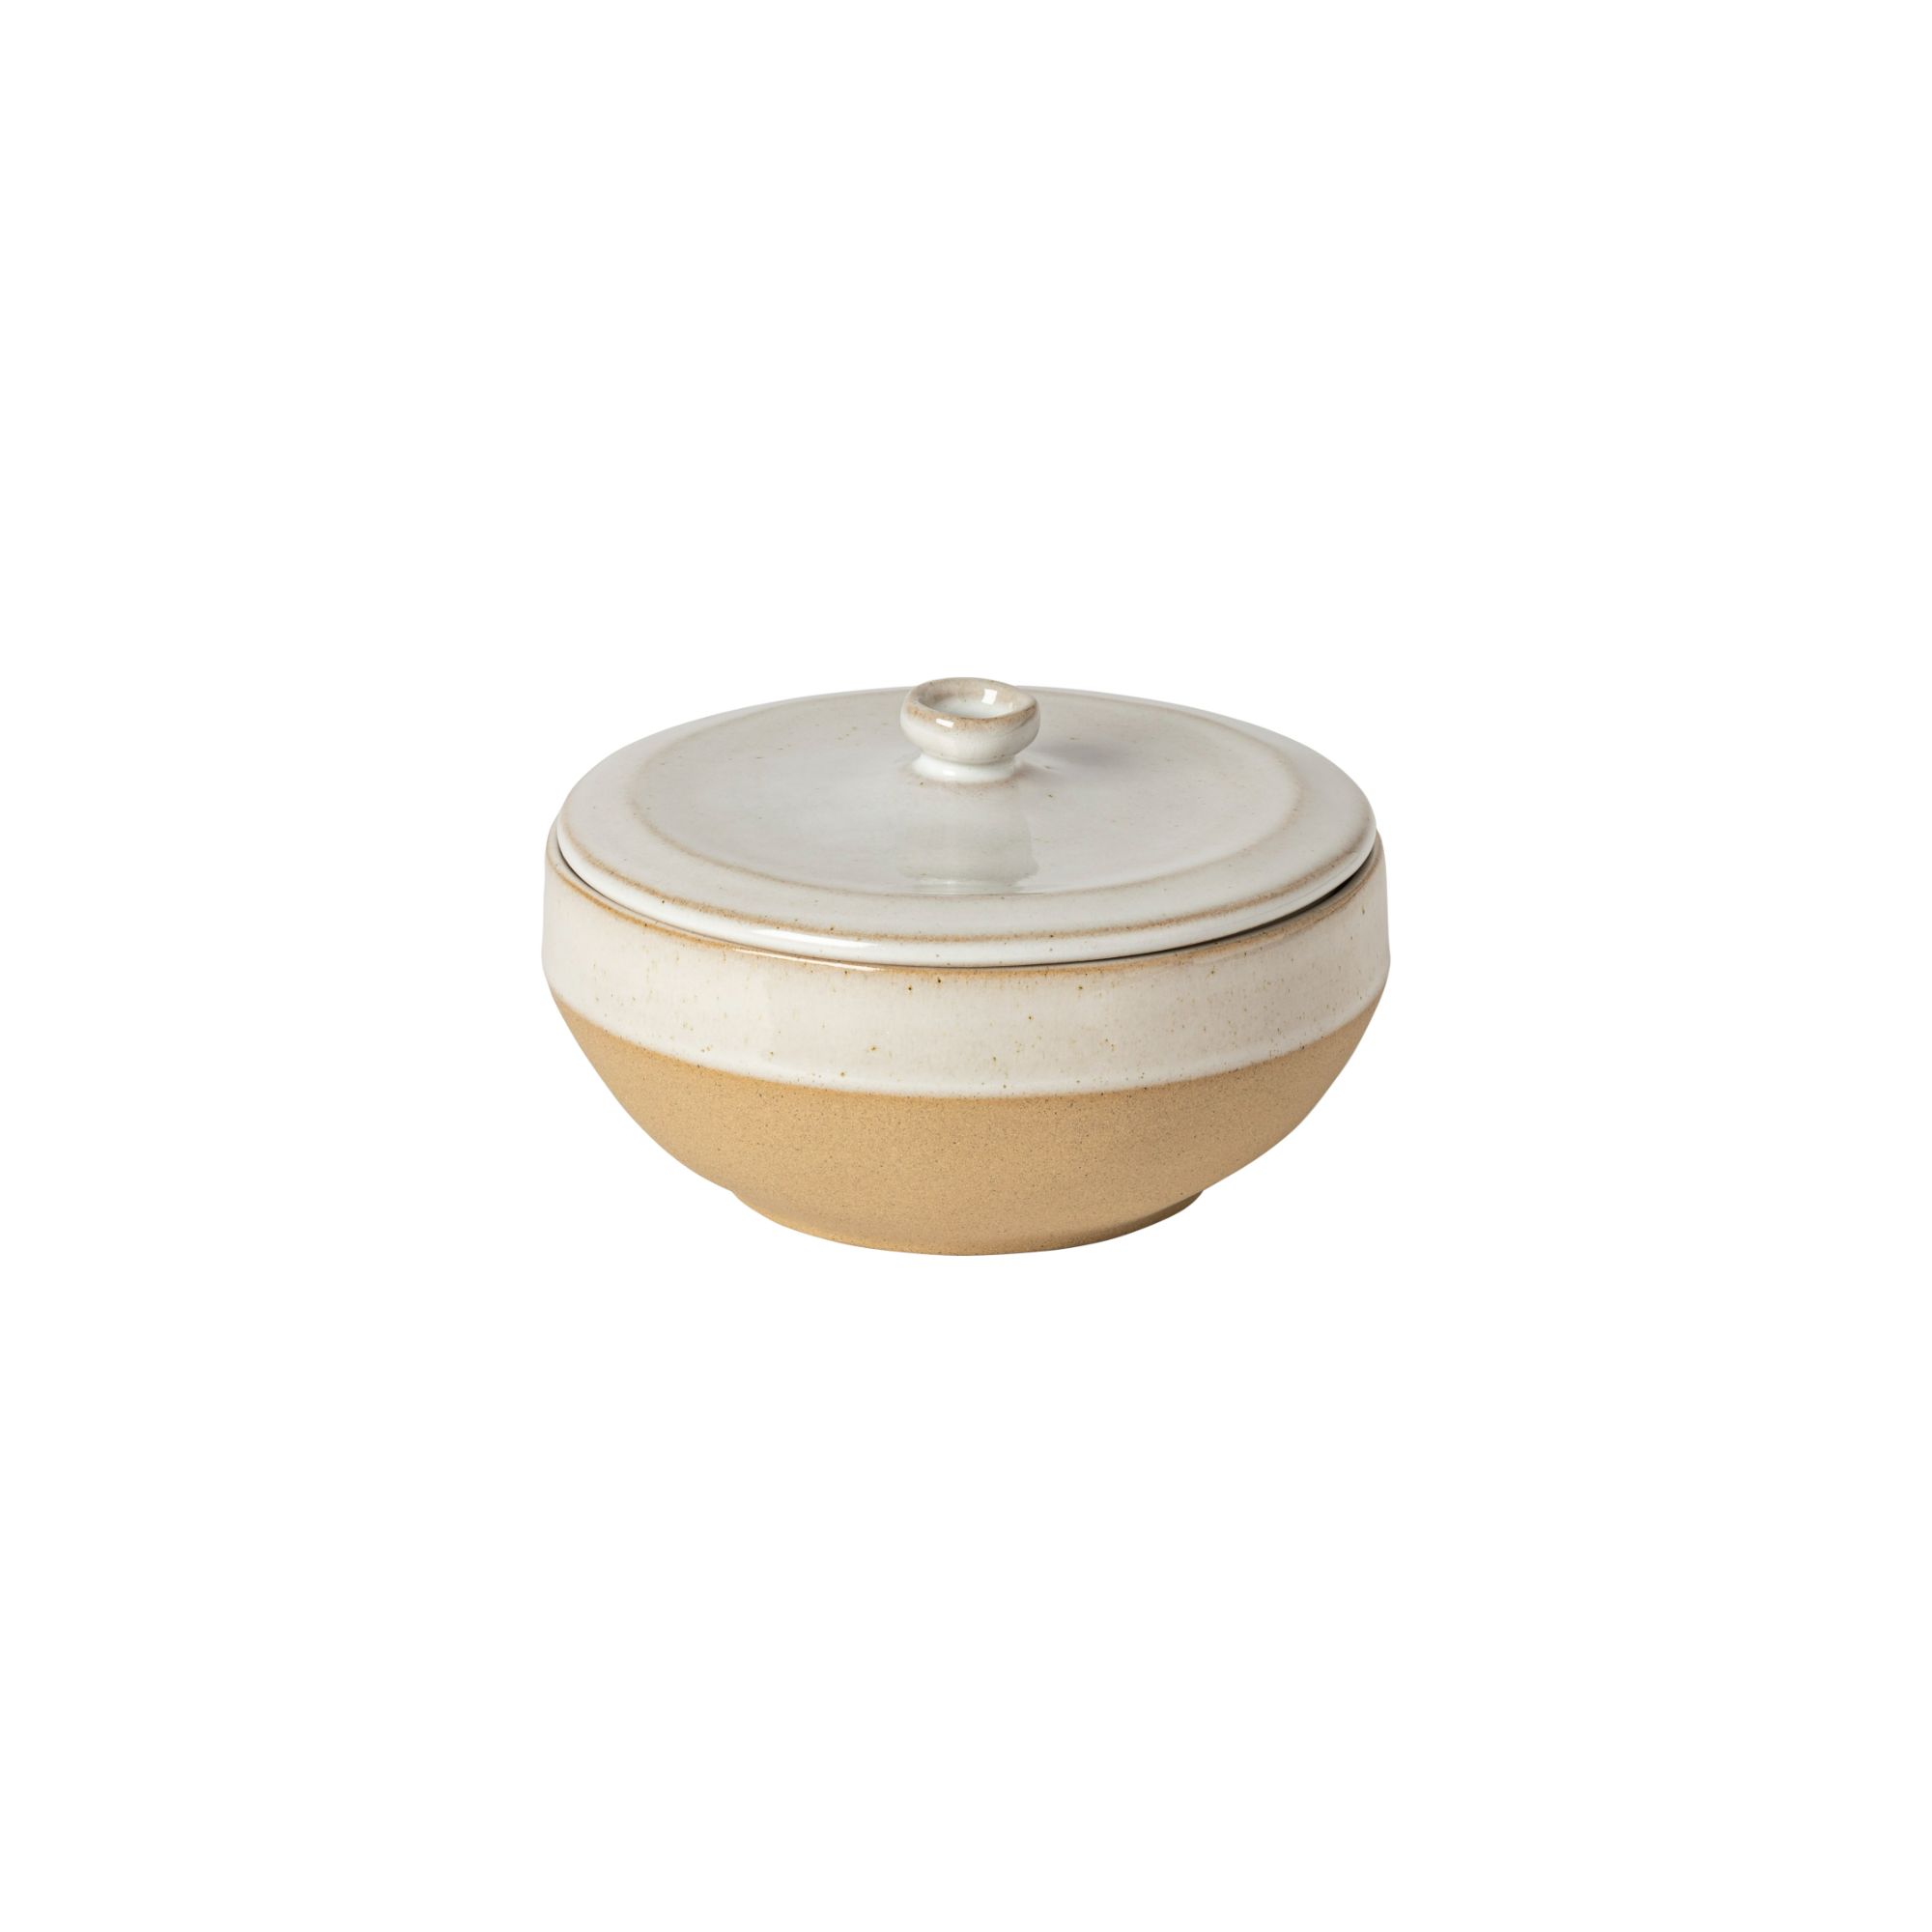 Marrakesh Sable Blanc Covered Casserole 15cm Gift